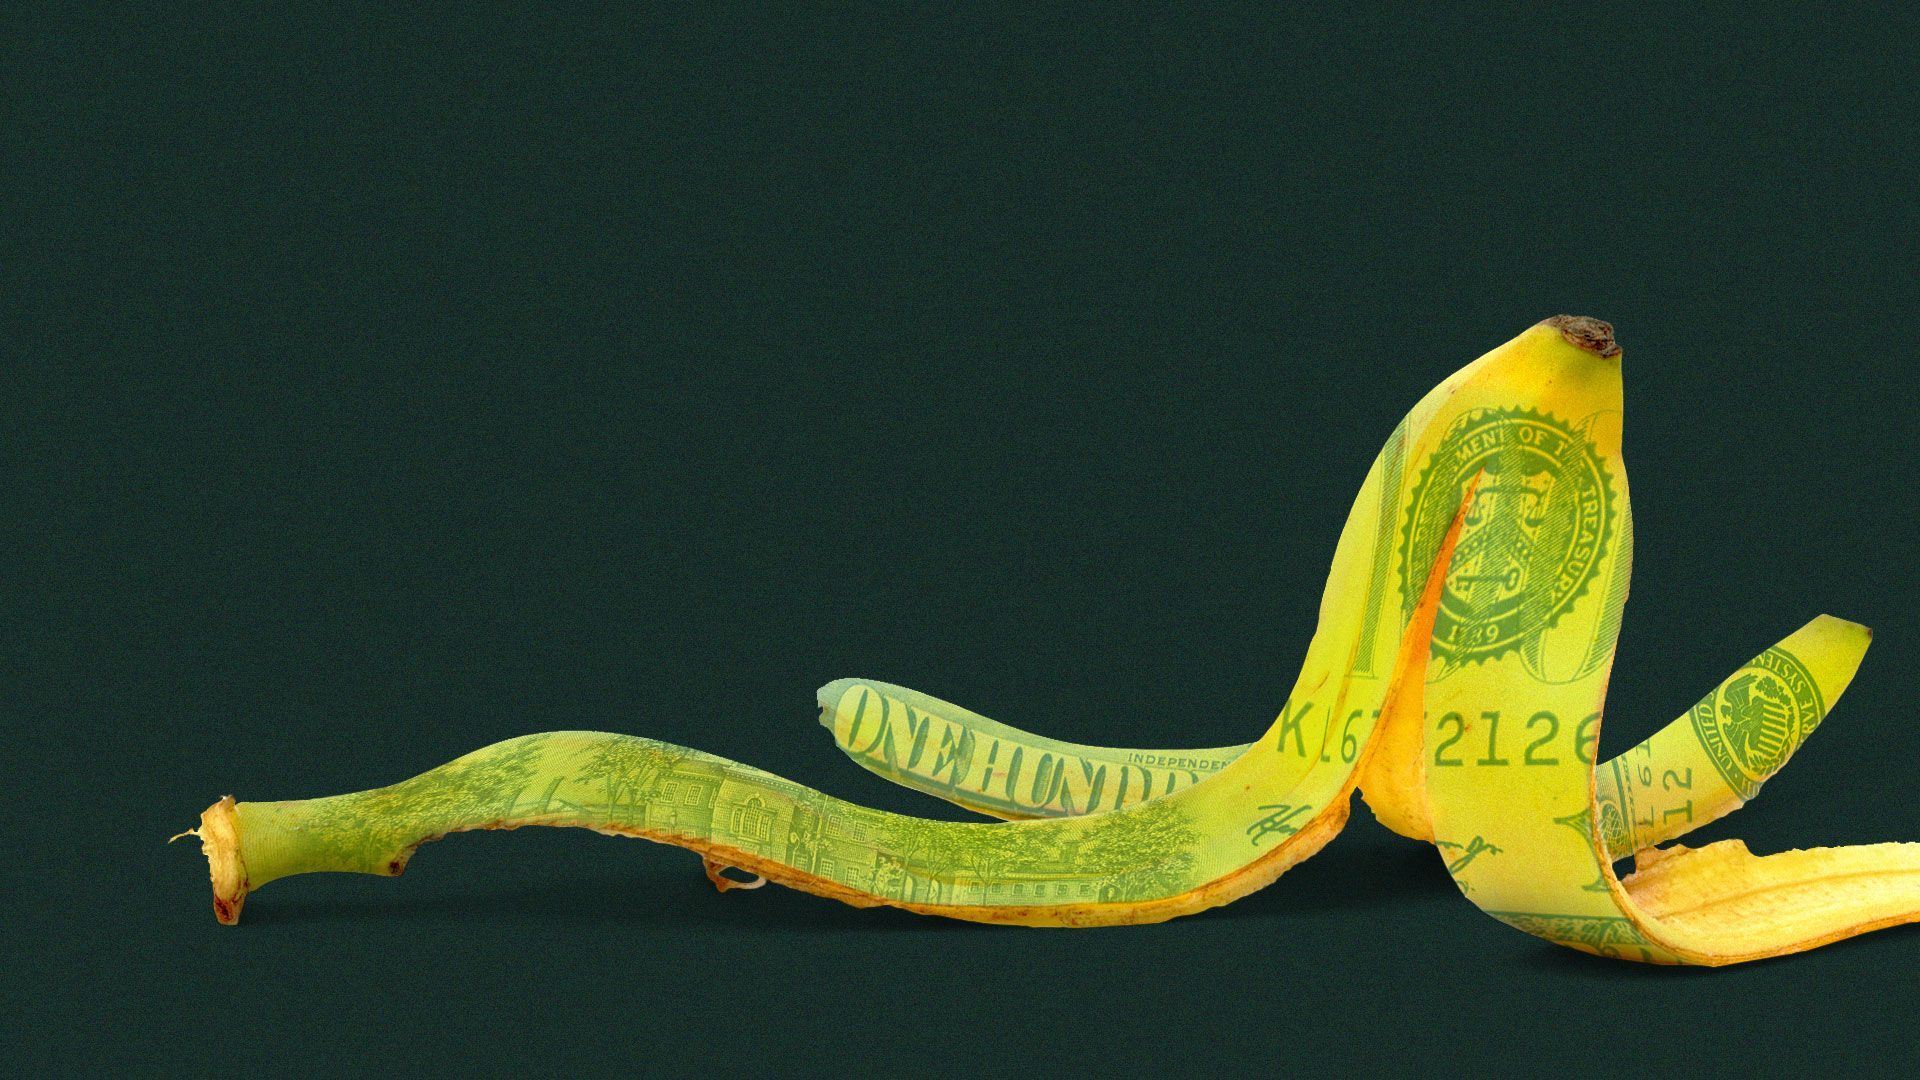 Illustration of an empty banana peel overlaid with a $100 bill.